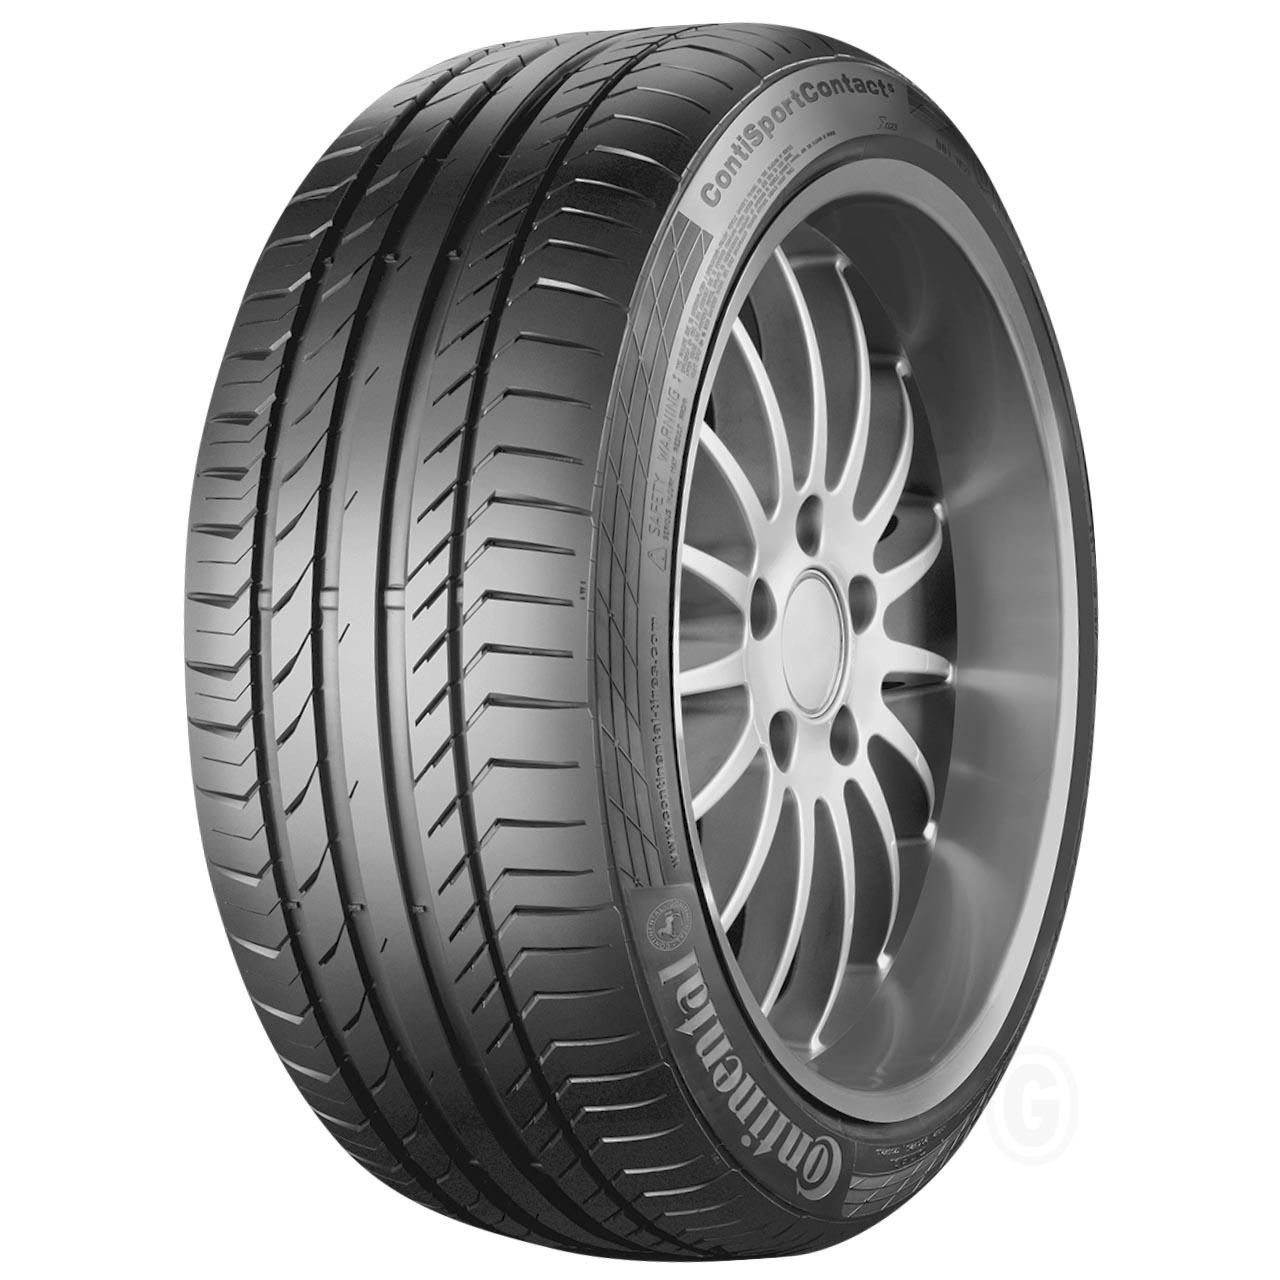 Continental CONTISPORTCONTACT 5 275/45R18 103W FR MO